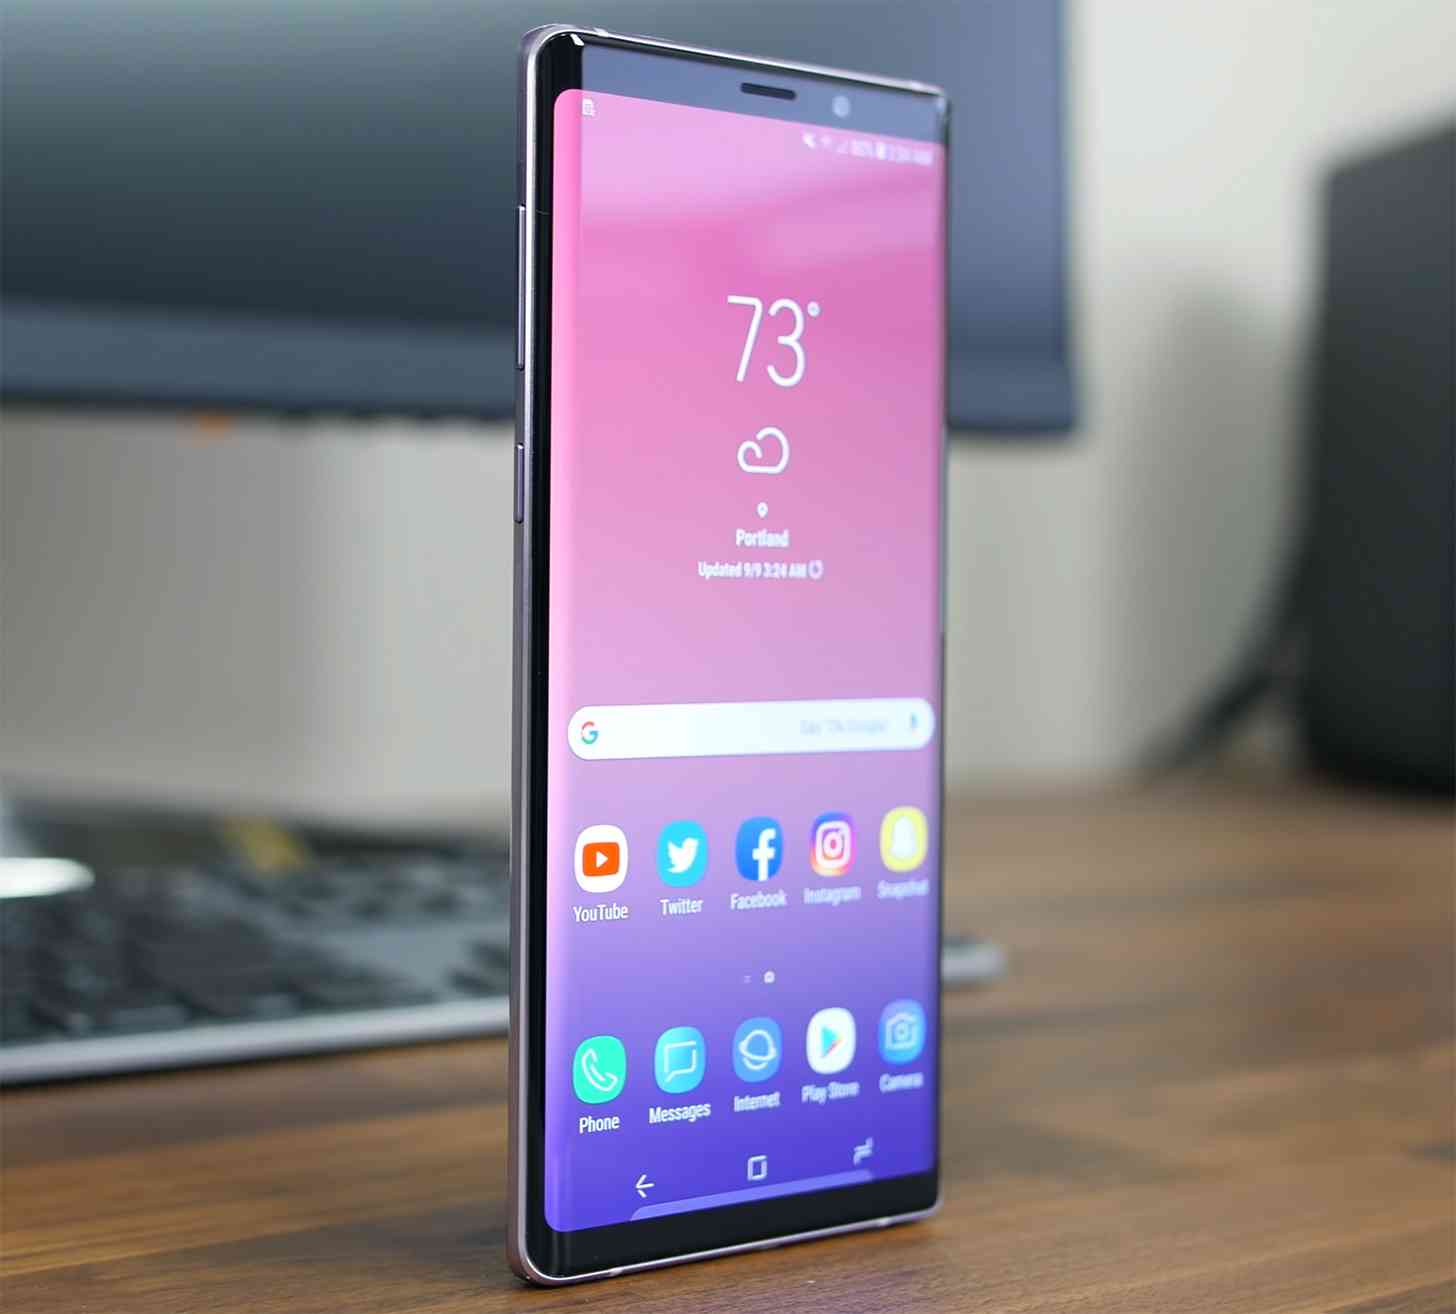 Samsung Galaxy Note 9 hands-on video